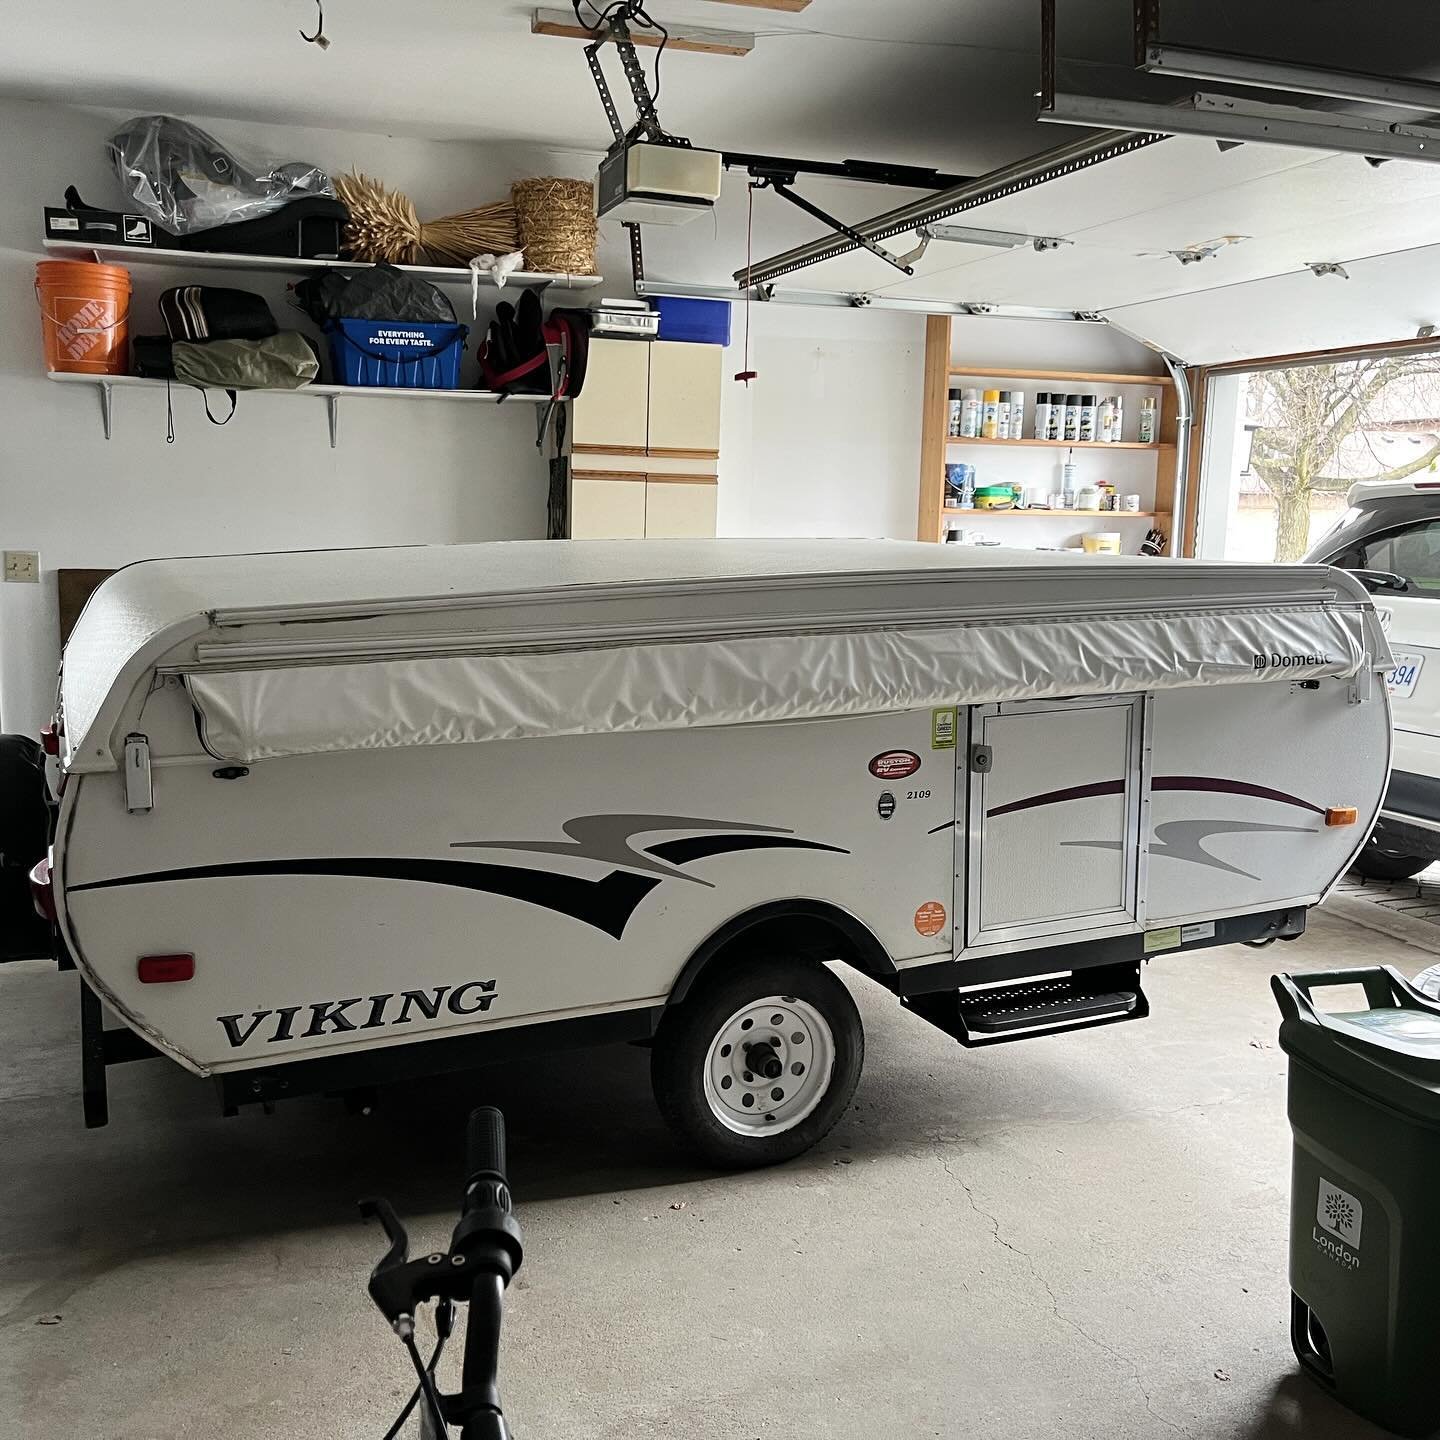 Here she is! 🤩 

First: I just want to take a second to brag that my brief experience of towing landscape trailers 15 years ago is still with me and this only took ONE TRY! 😎

Second, if you&rsquo;re anything like me (and I assume you are because y